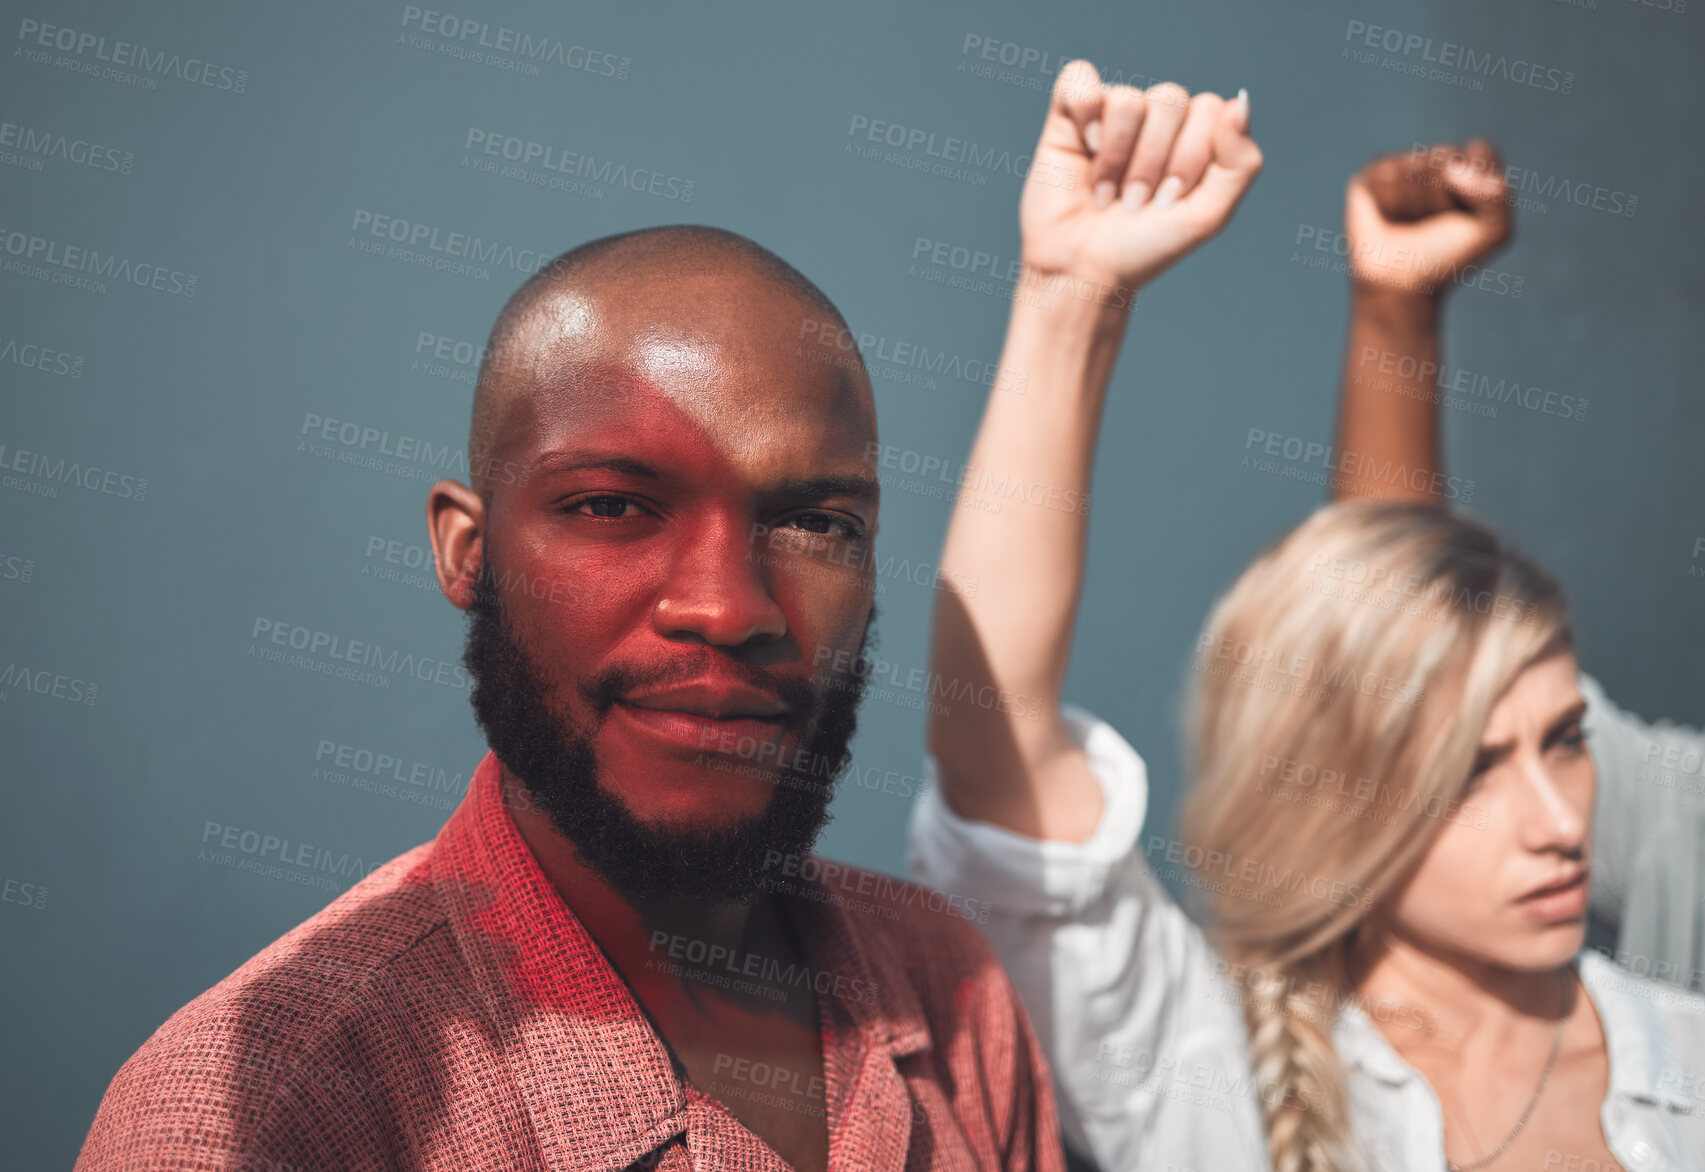 Buy stock photo Portrait of young, african american man standing together  with protesters, holding fists, showing strong striking gesture in support Social justice human rights issues movement stands in unity 